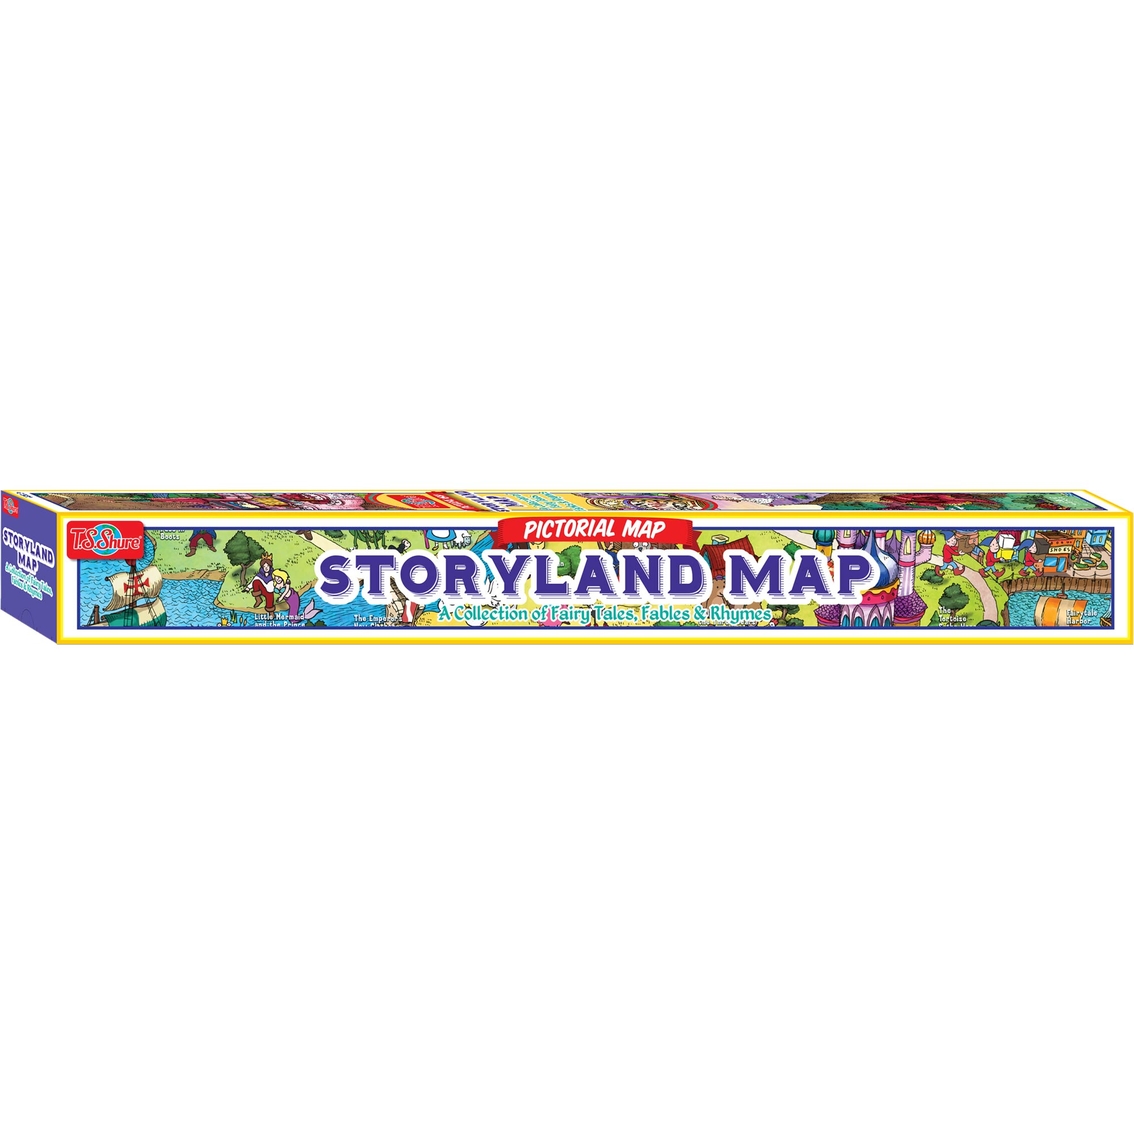 T.S. Shure Storyland Map Pictorial Poster - Image 4 of 4